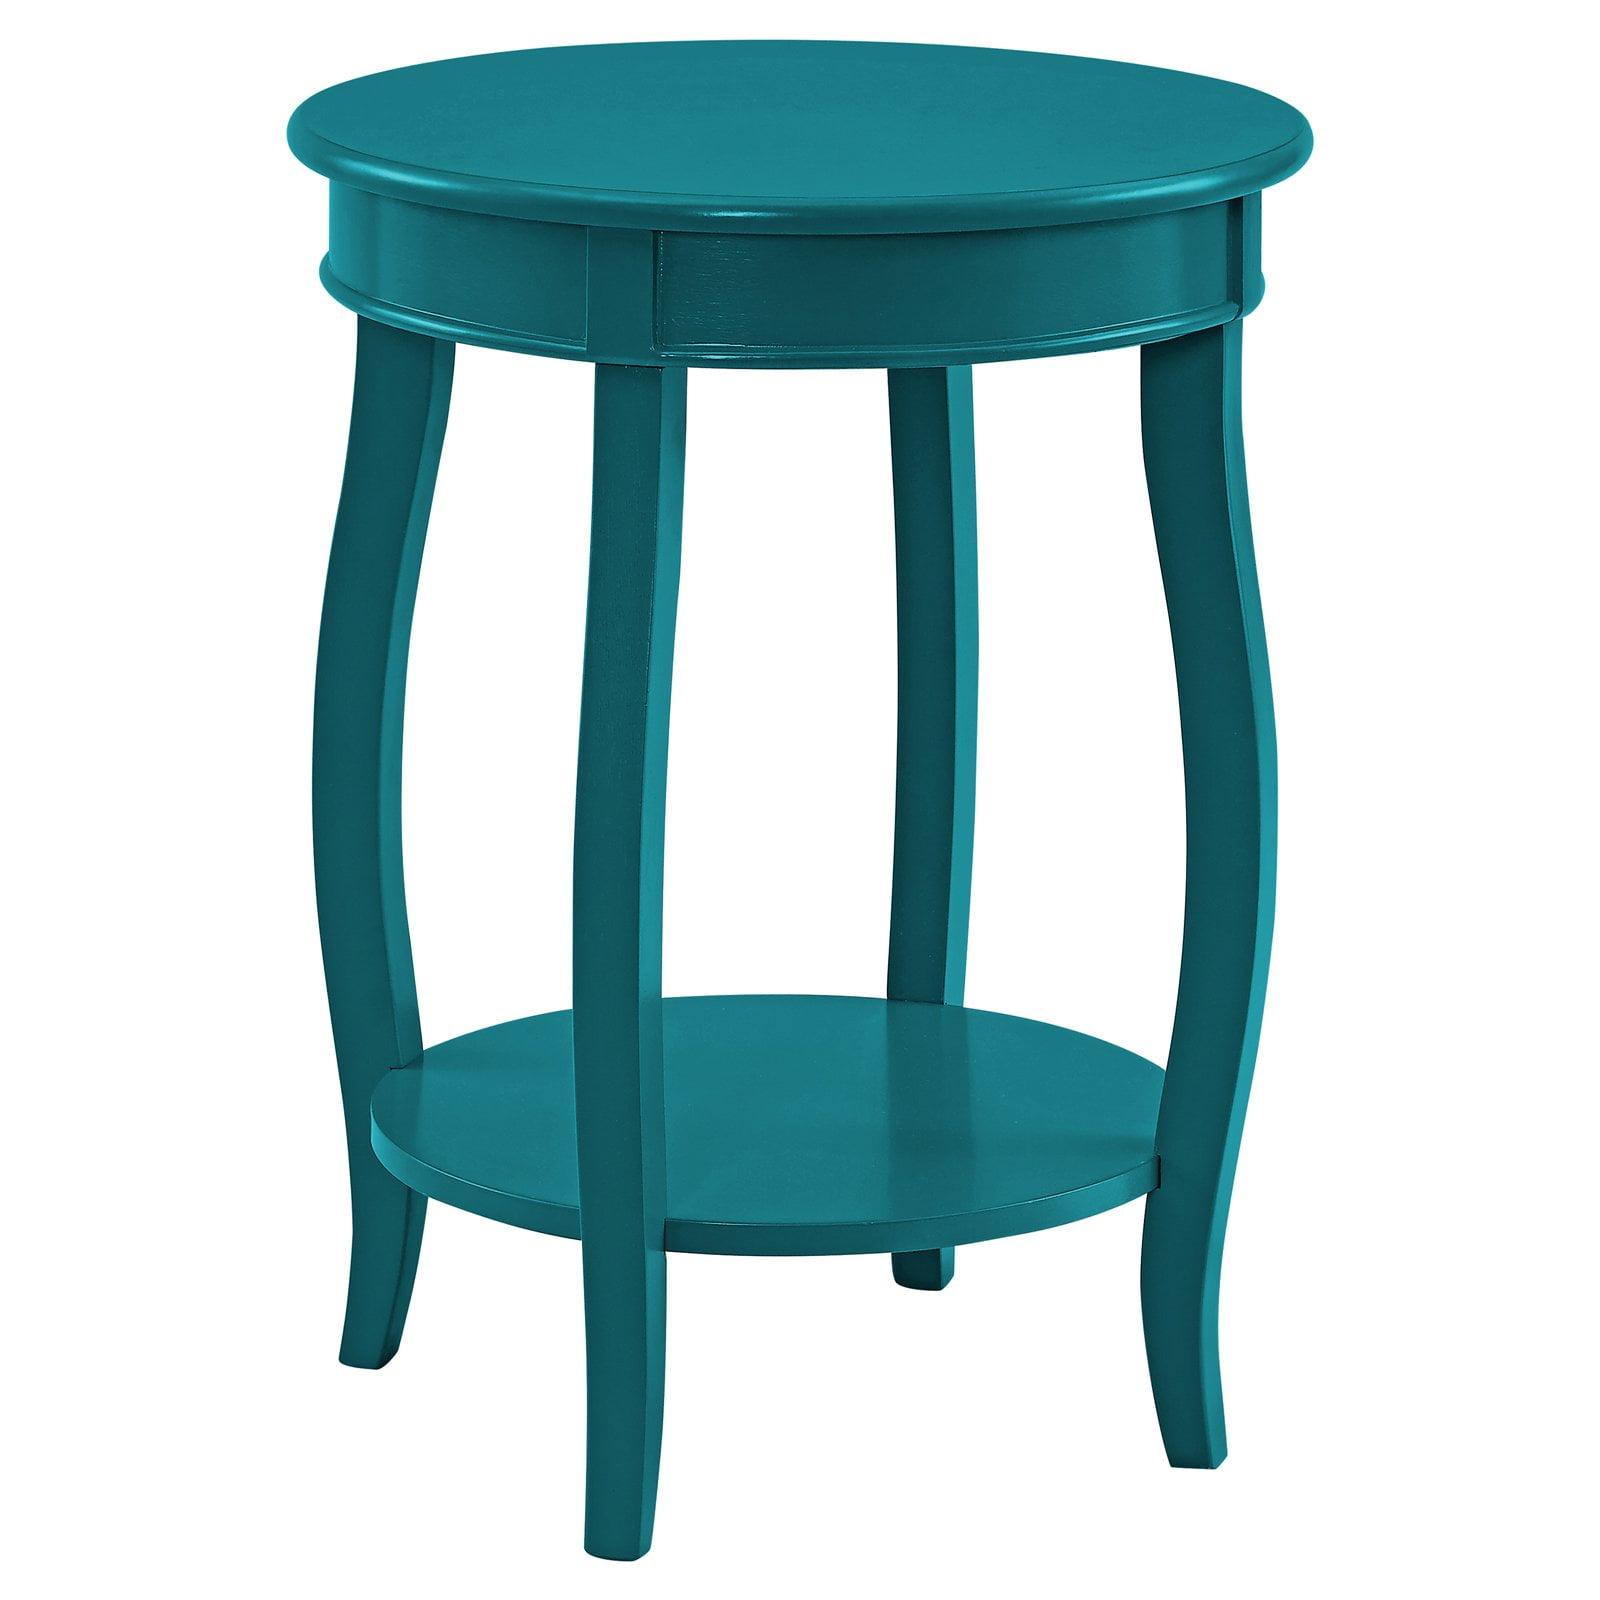 Teal Bohemian Round Wood Accent Table with Shelf